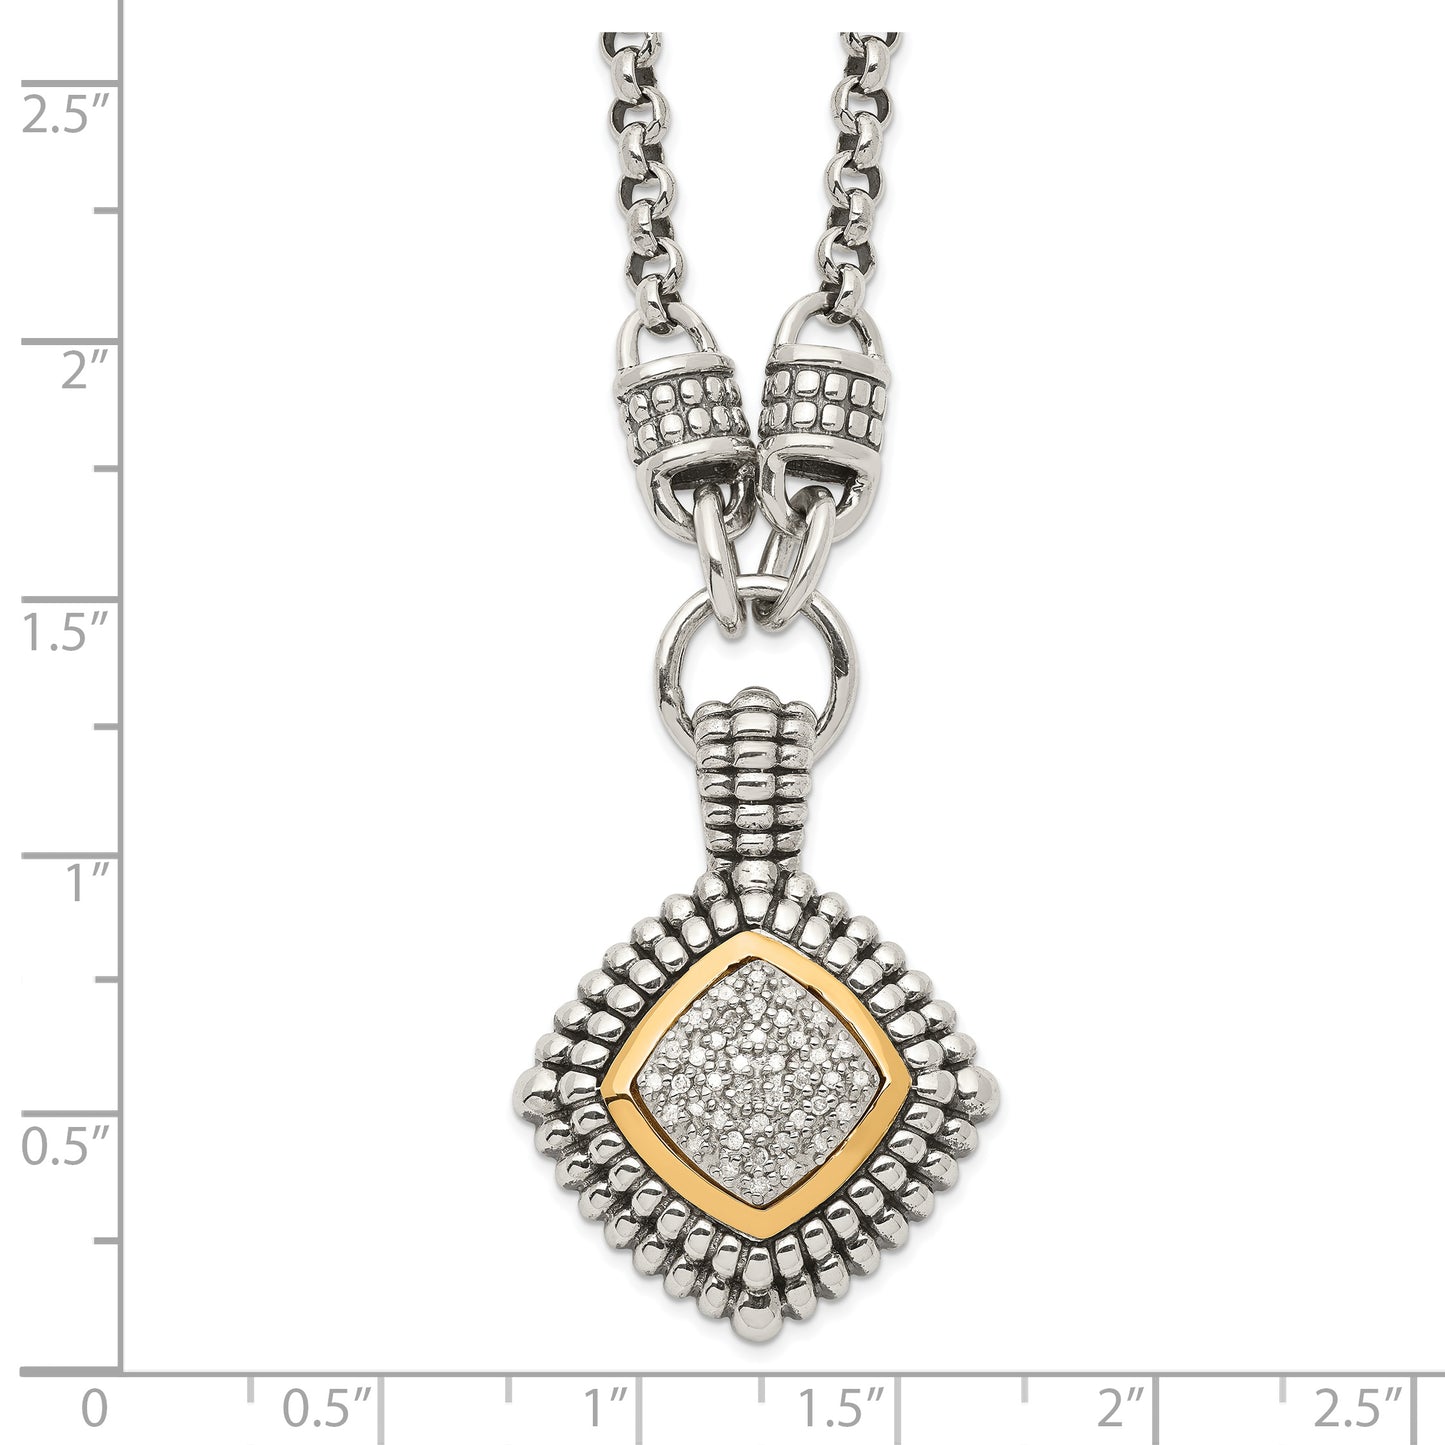 Shey Couture Sterling Silver with 14K Accent 17 Inch Antiqued Diamond Necklace